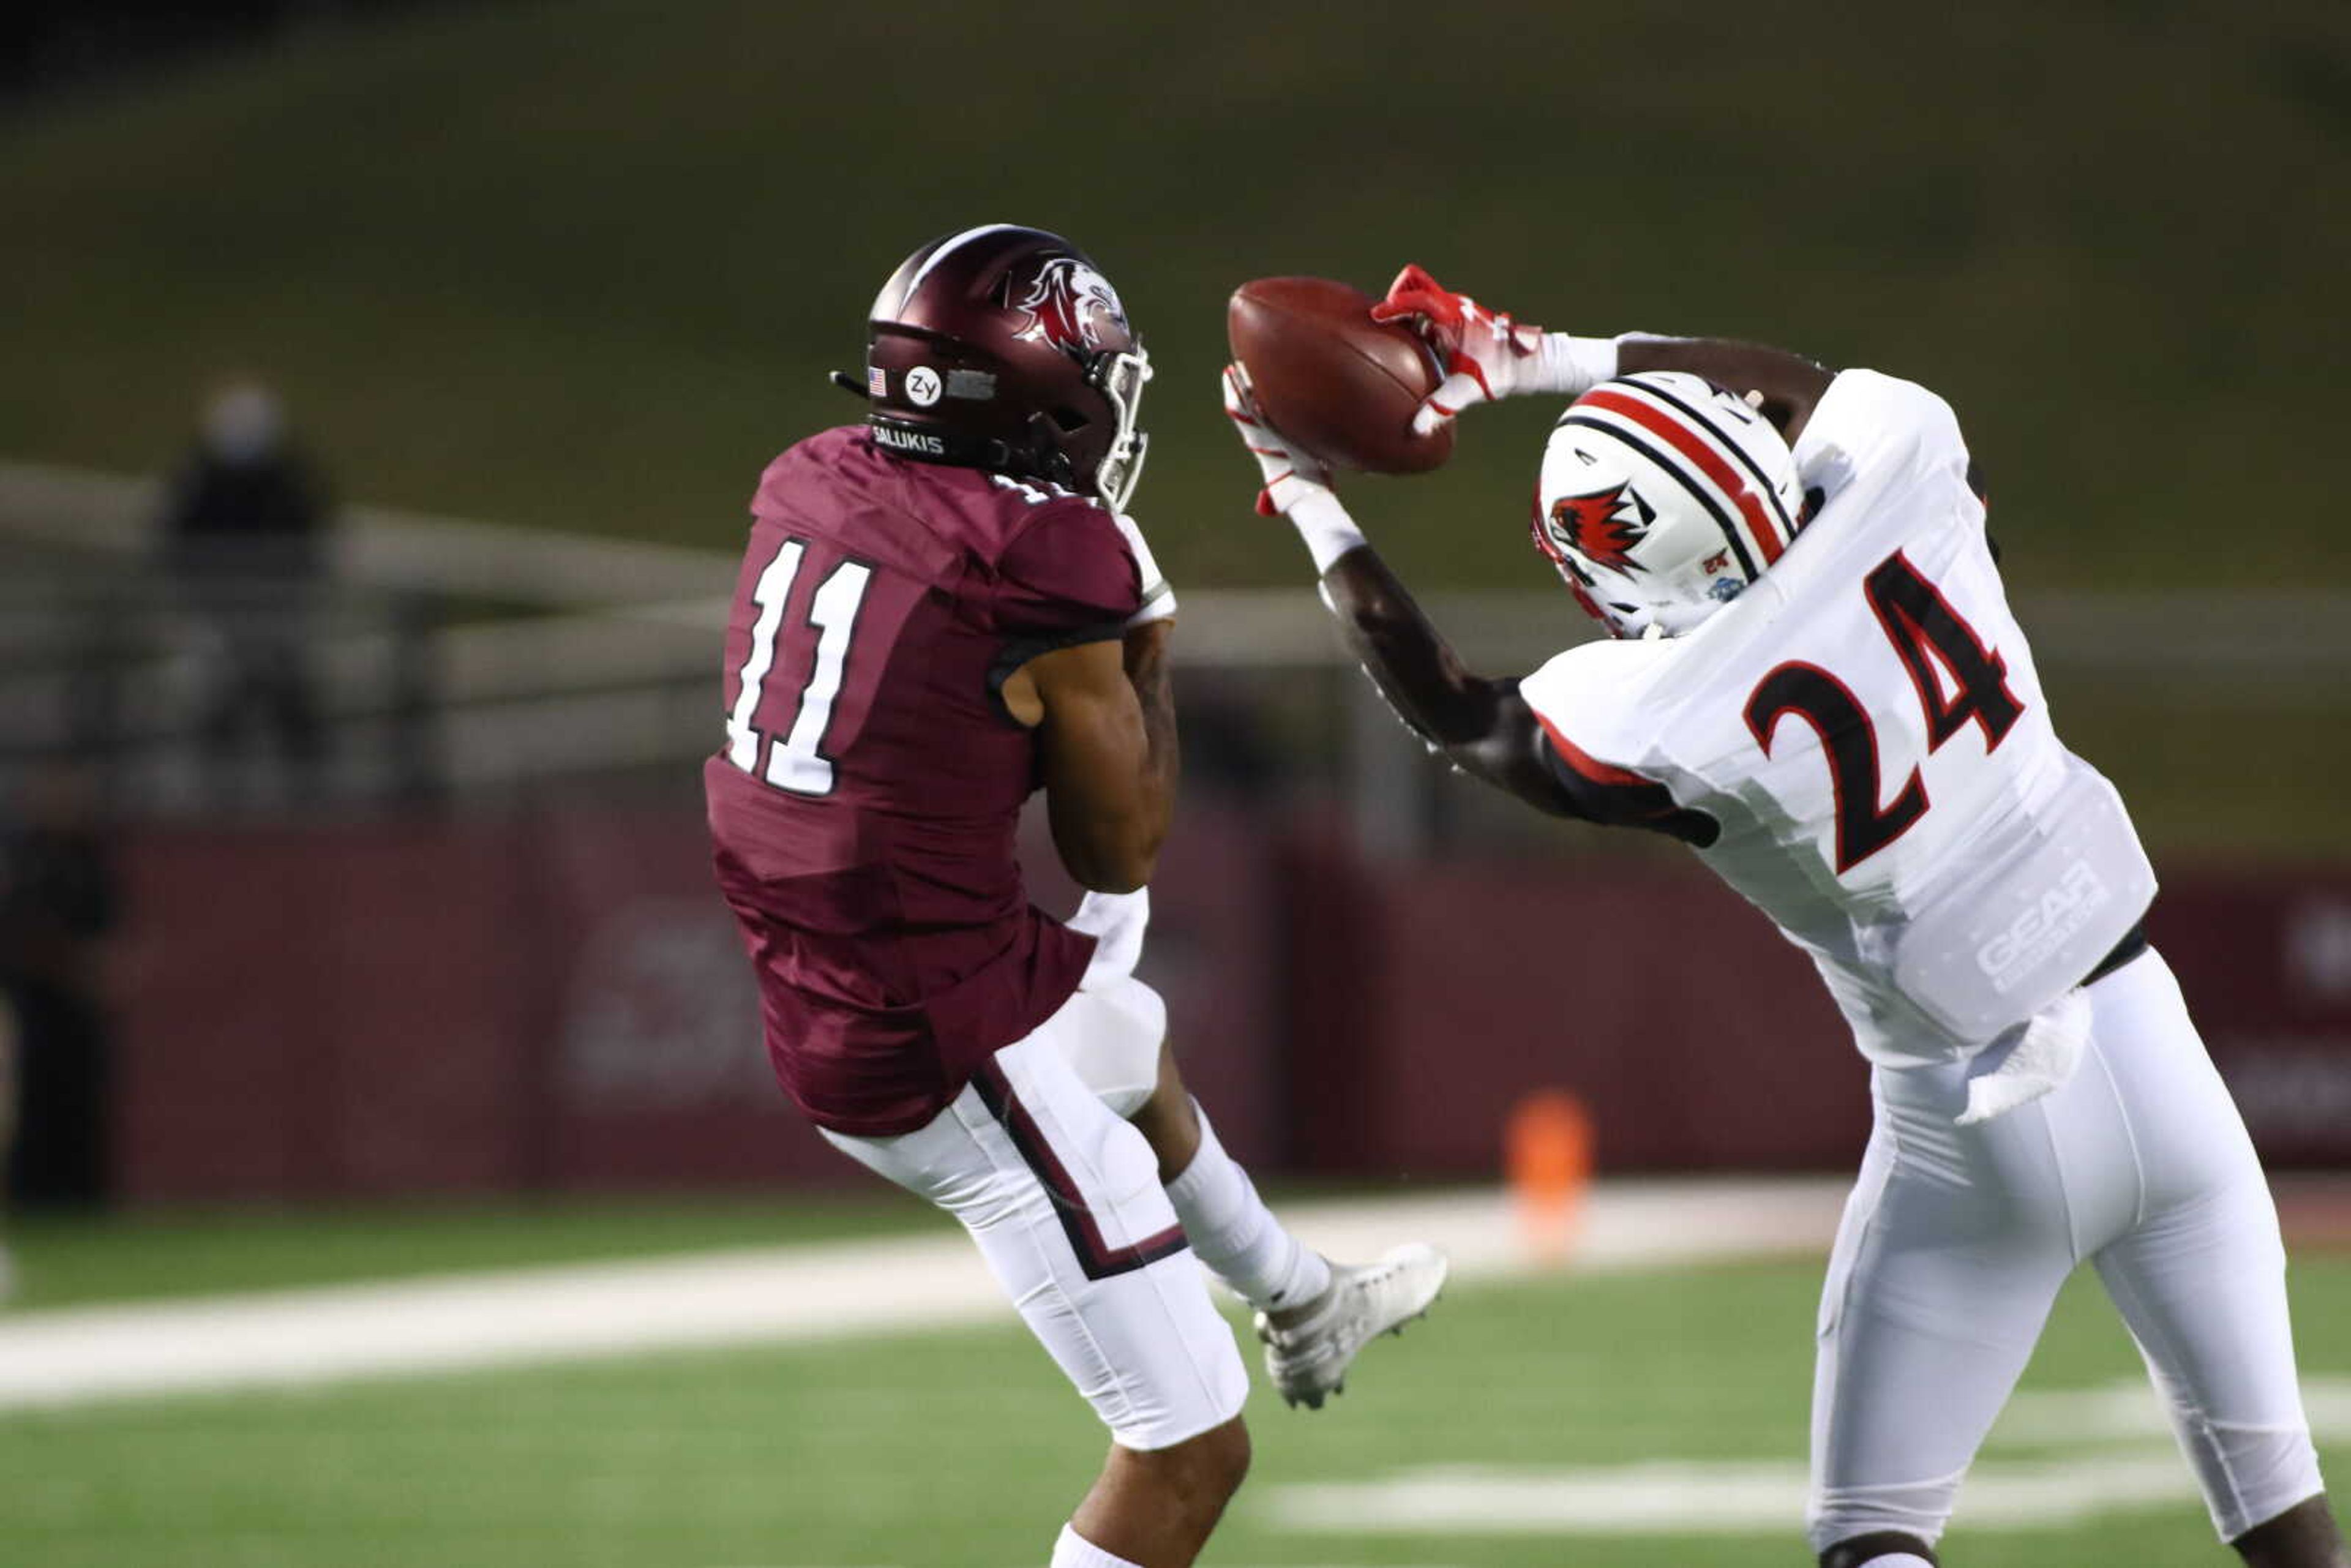 Graduate Student Shabari Davis intercepts a pass in the first quarter of the 20-17 loss to Southern Illinois on Oct. 30, 2020 at Saluki Stadium in Carbondale, Ill.